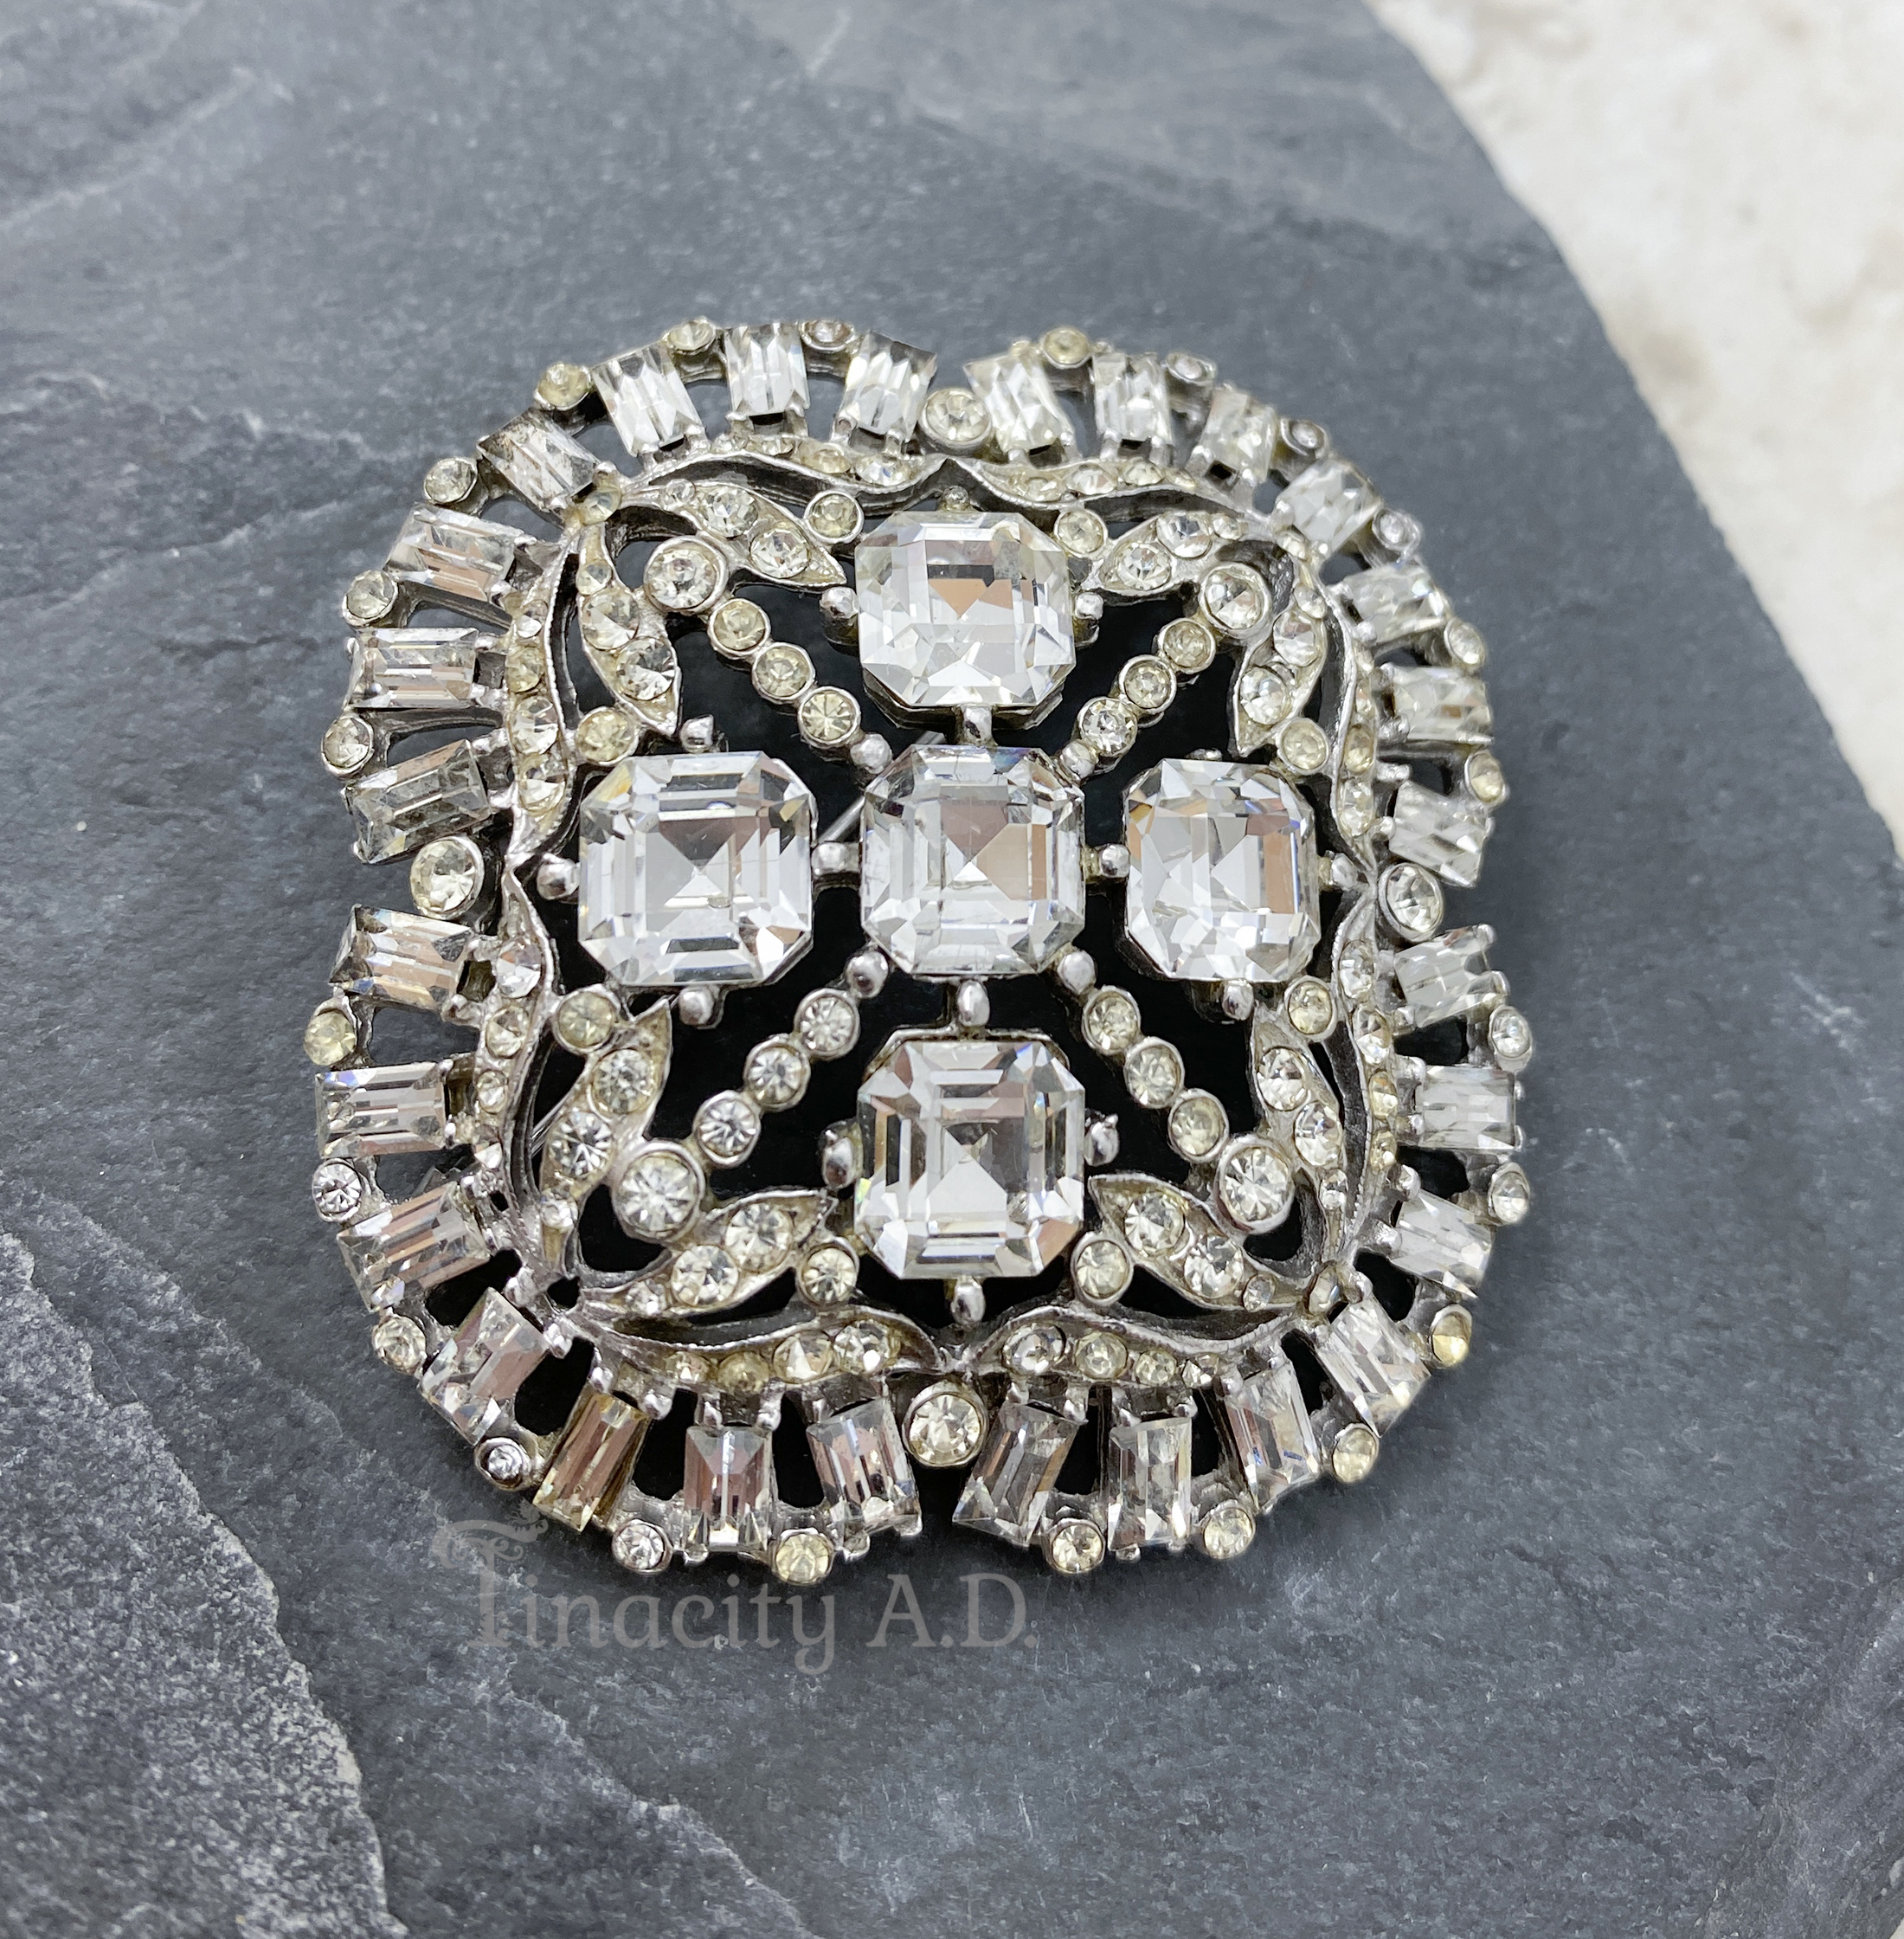 A GORGEOUS Vintage Brooch, Art Deco Design Dating to the 1940's, Featuring  Emerald Cut, Baguette and Round Cut Rhinestones.